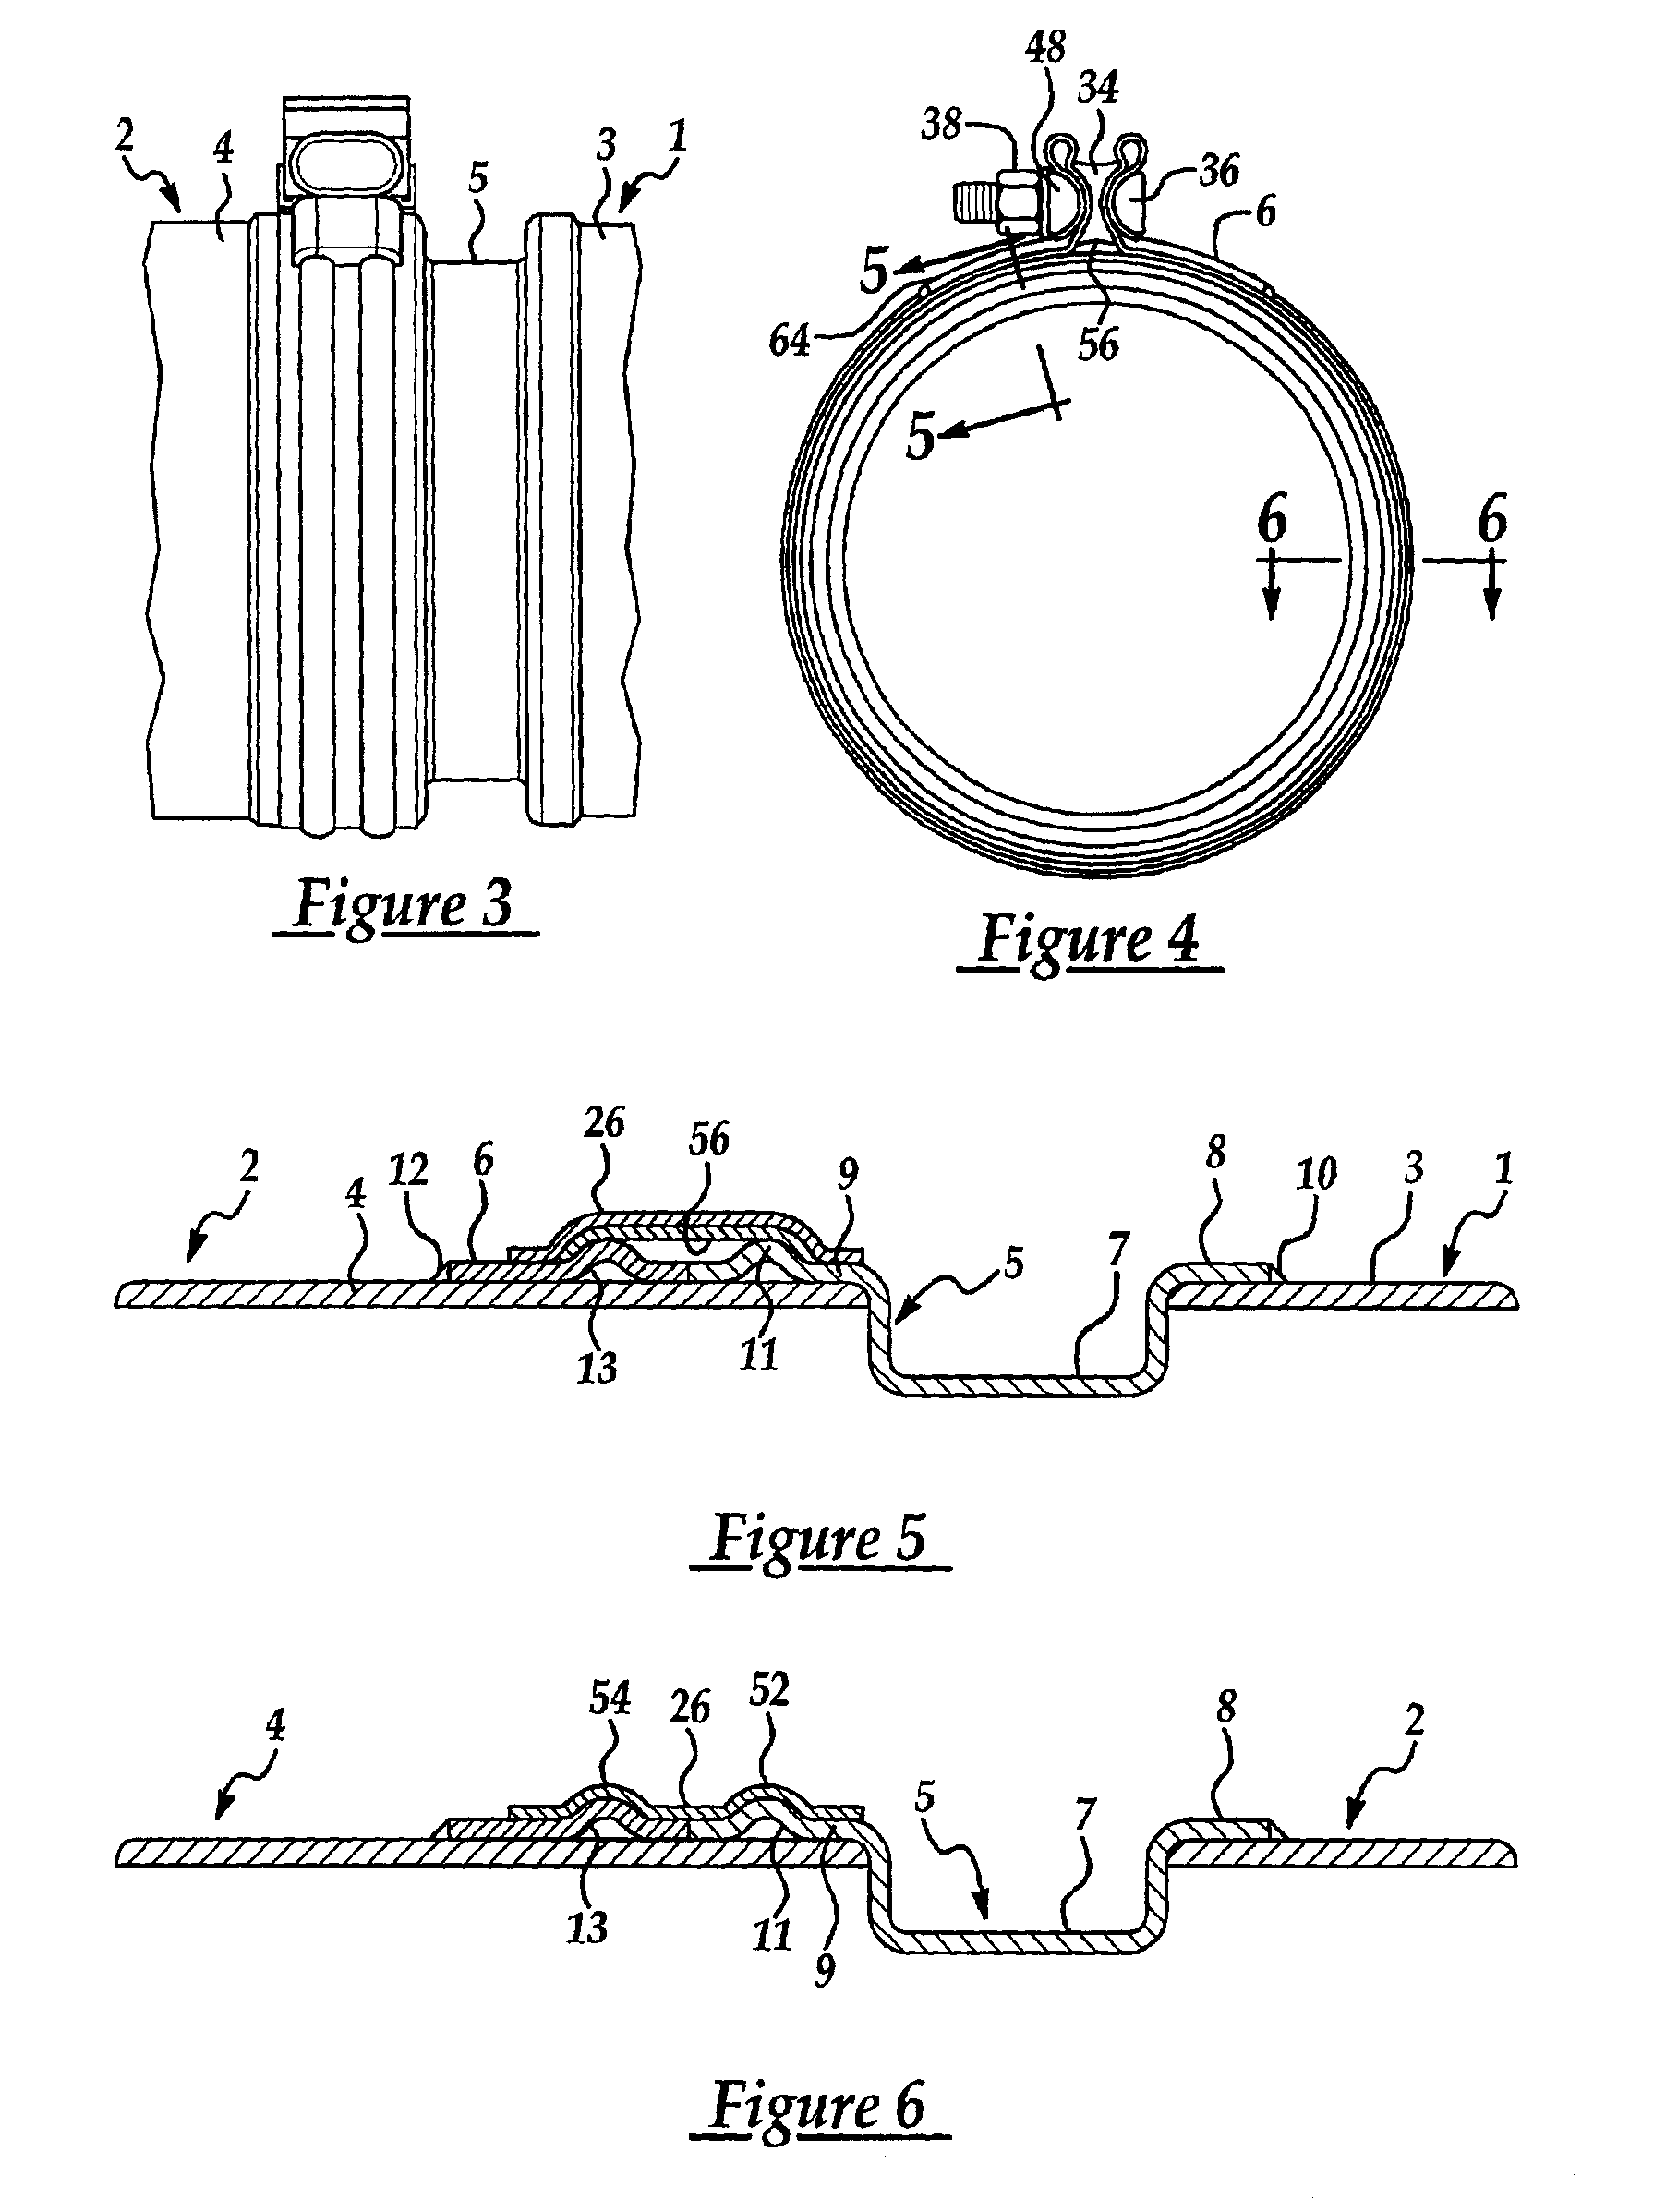 Clamp for joining tubular bodies